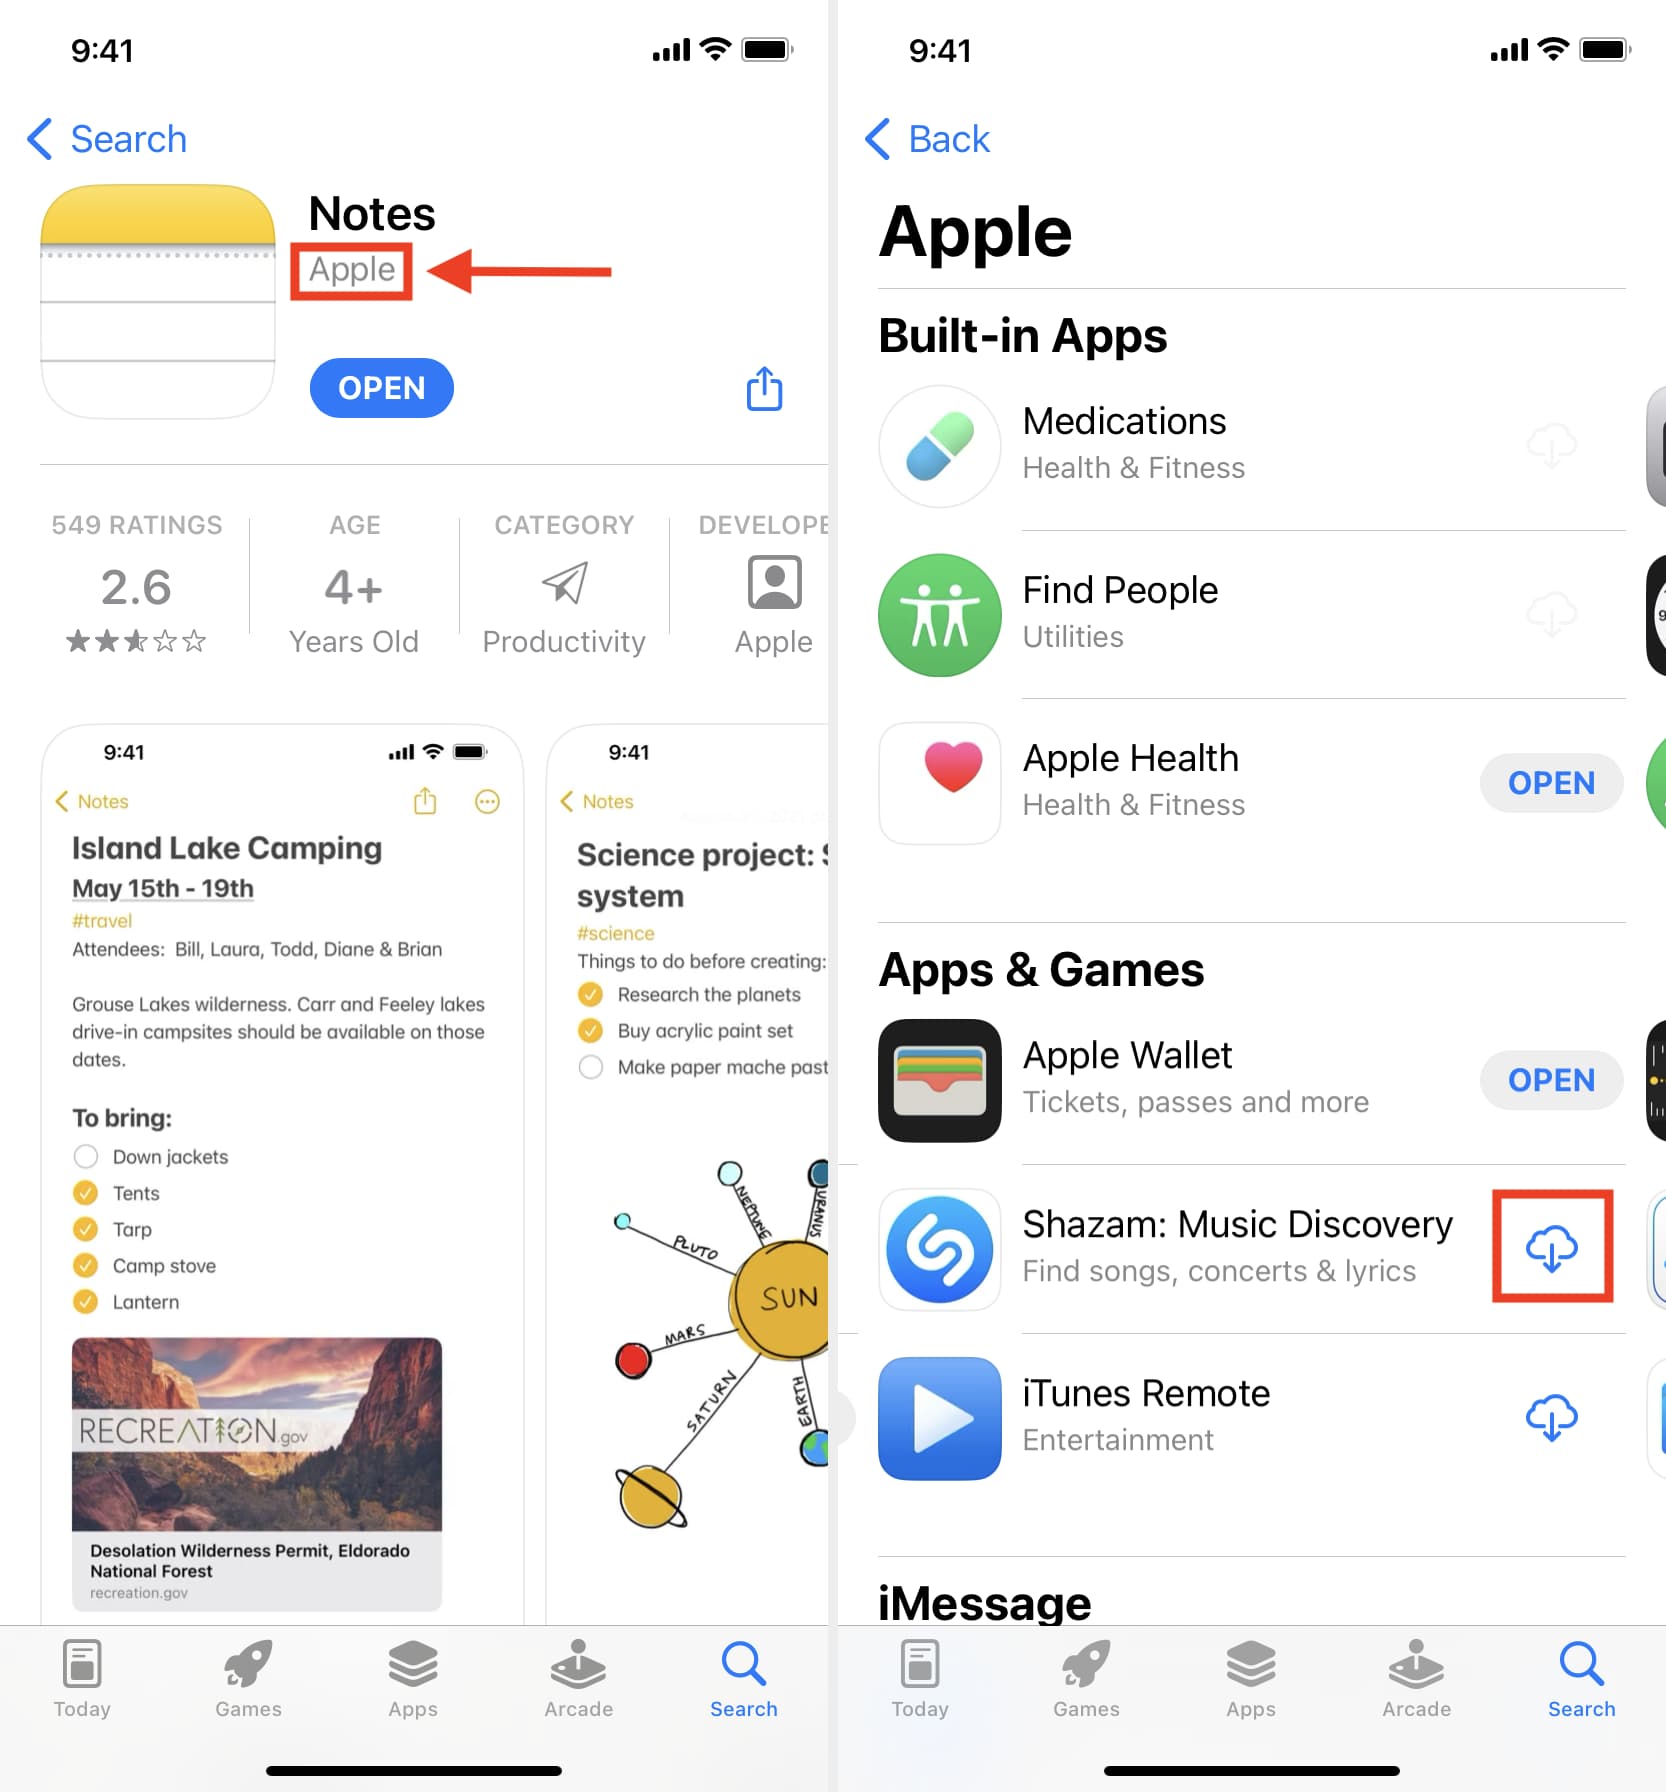 app-acquisition-a-guide-to-downloading-apps-on-iphone-12